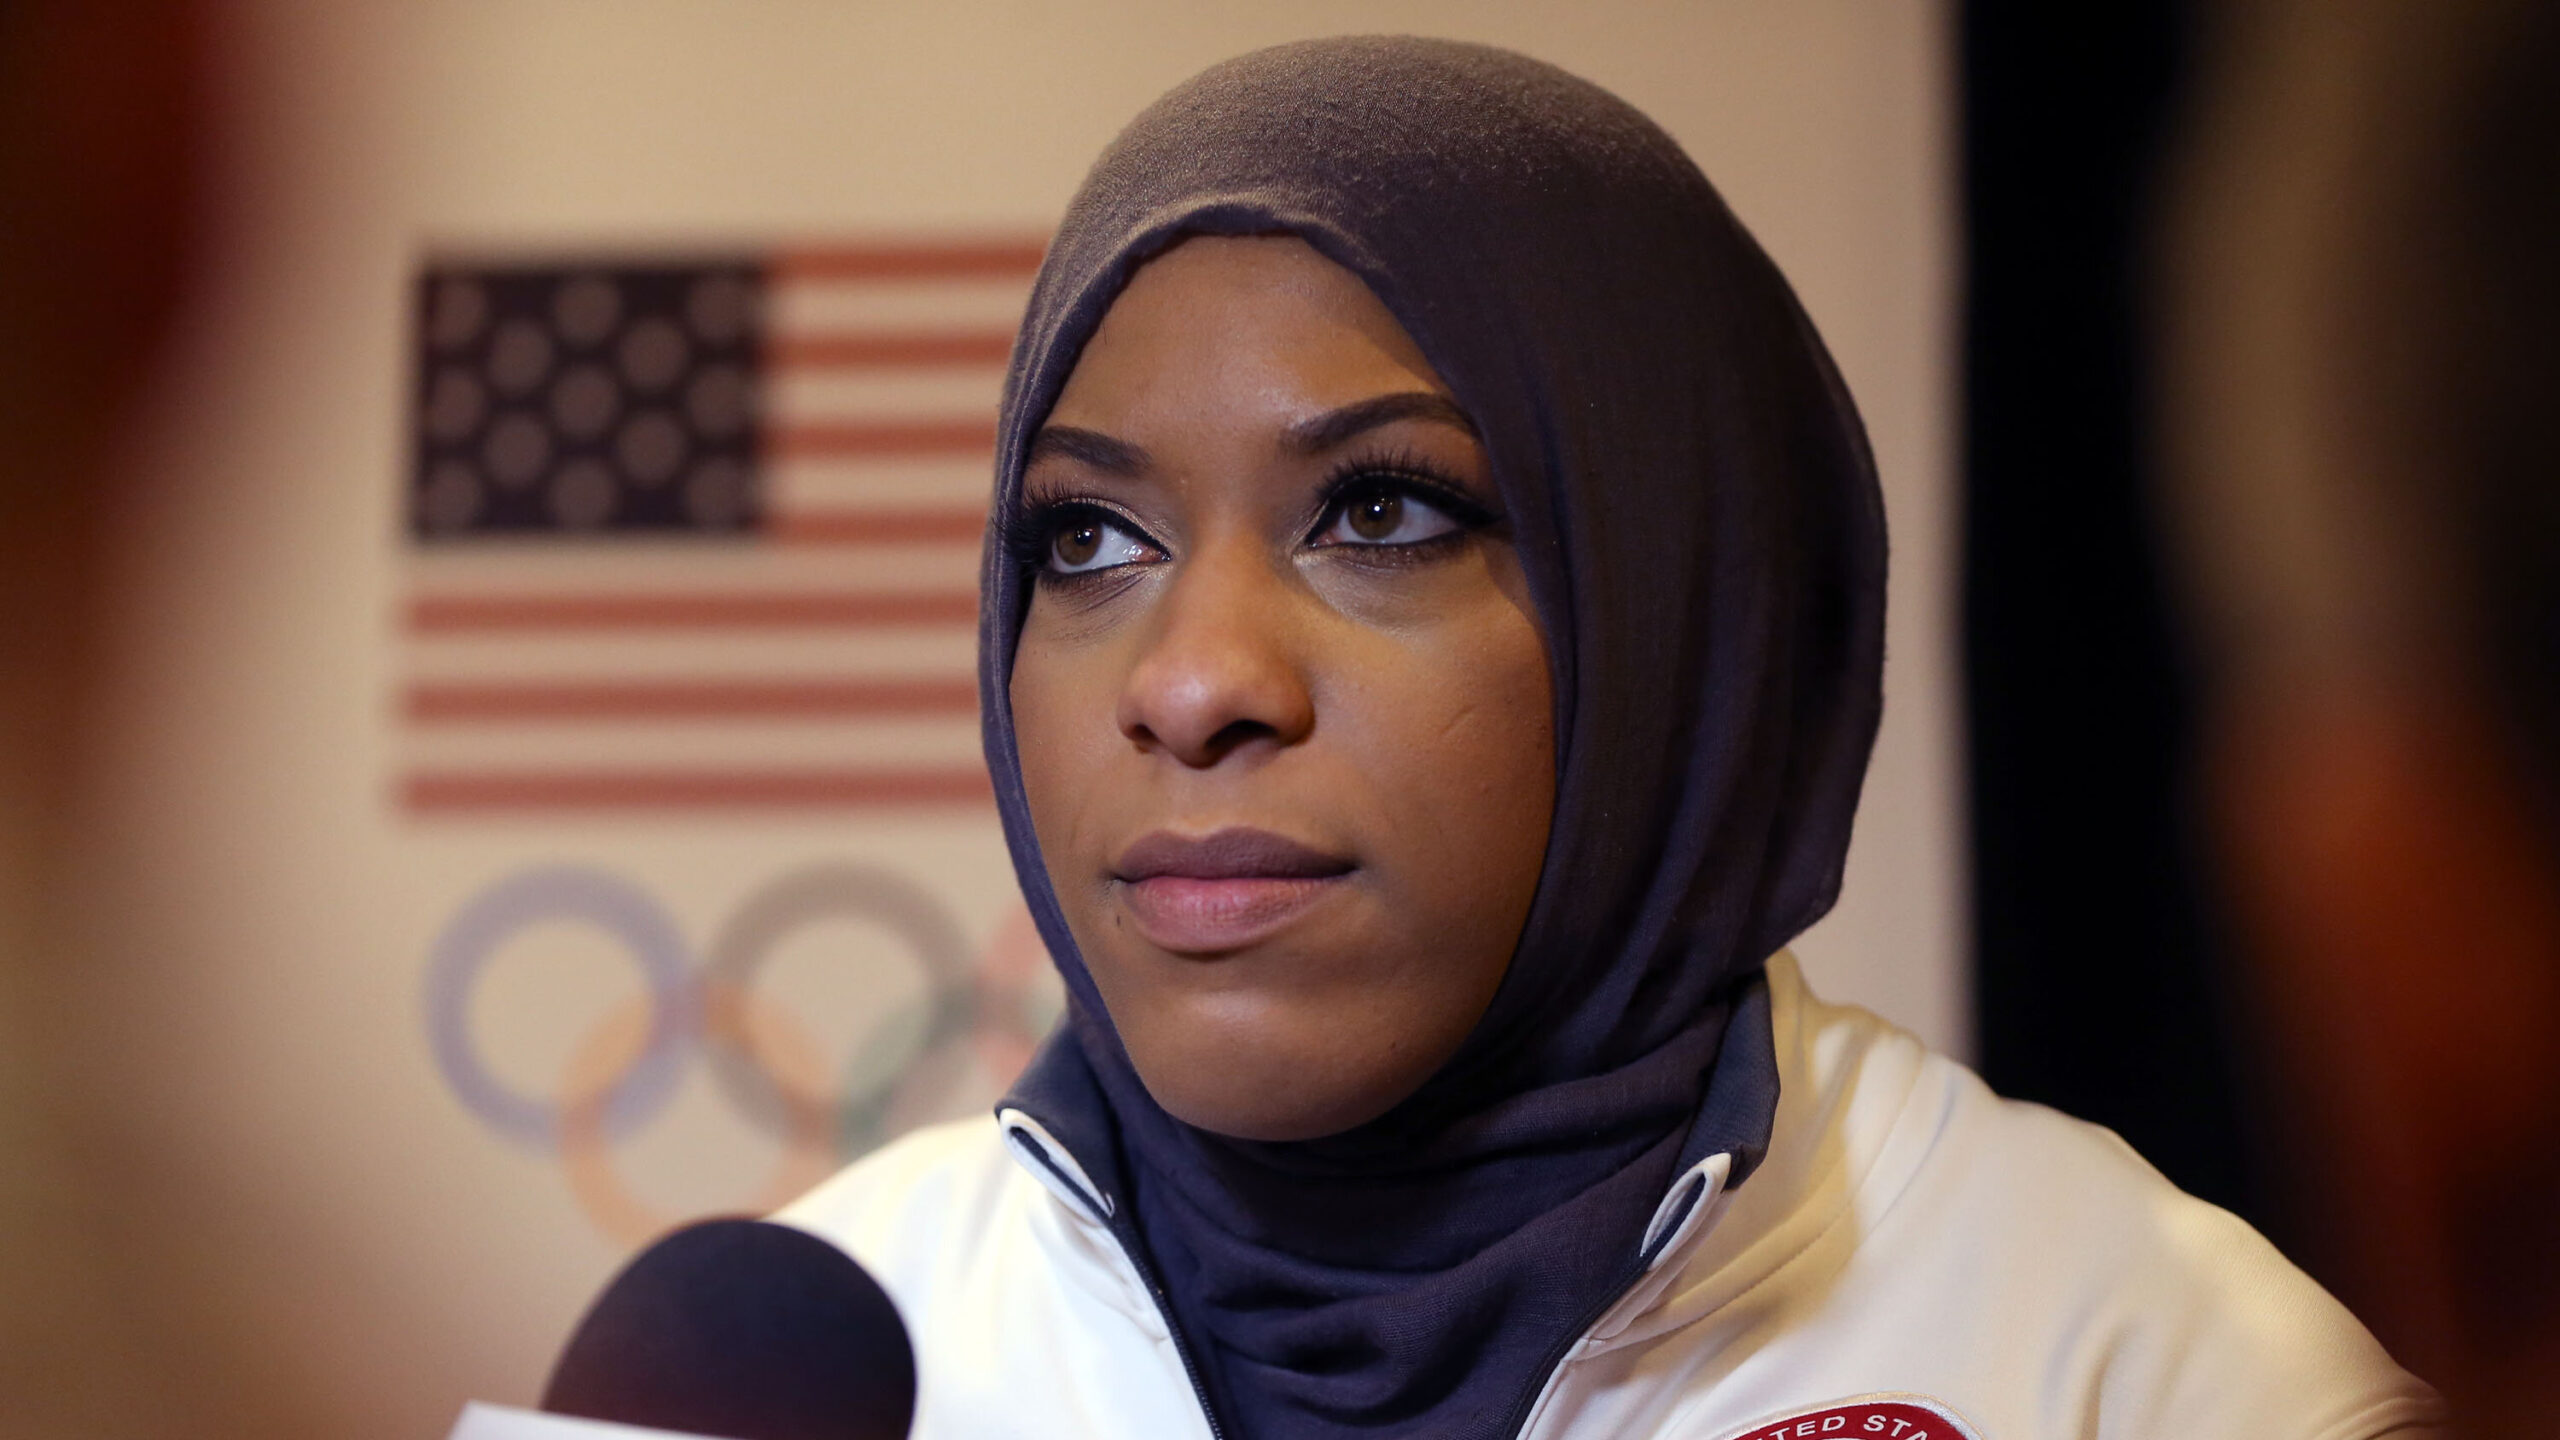 N.J. teacher files suit Olympian for claiming to have removed the hijab from the head of a 7-year-old